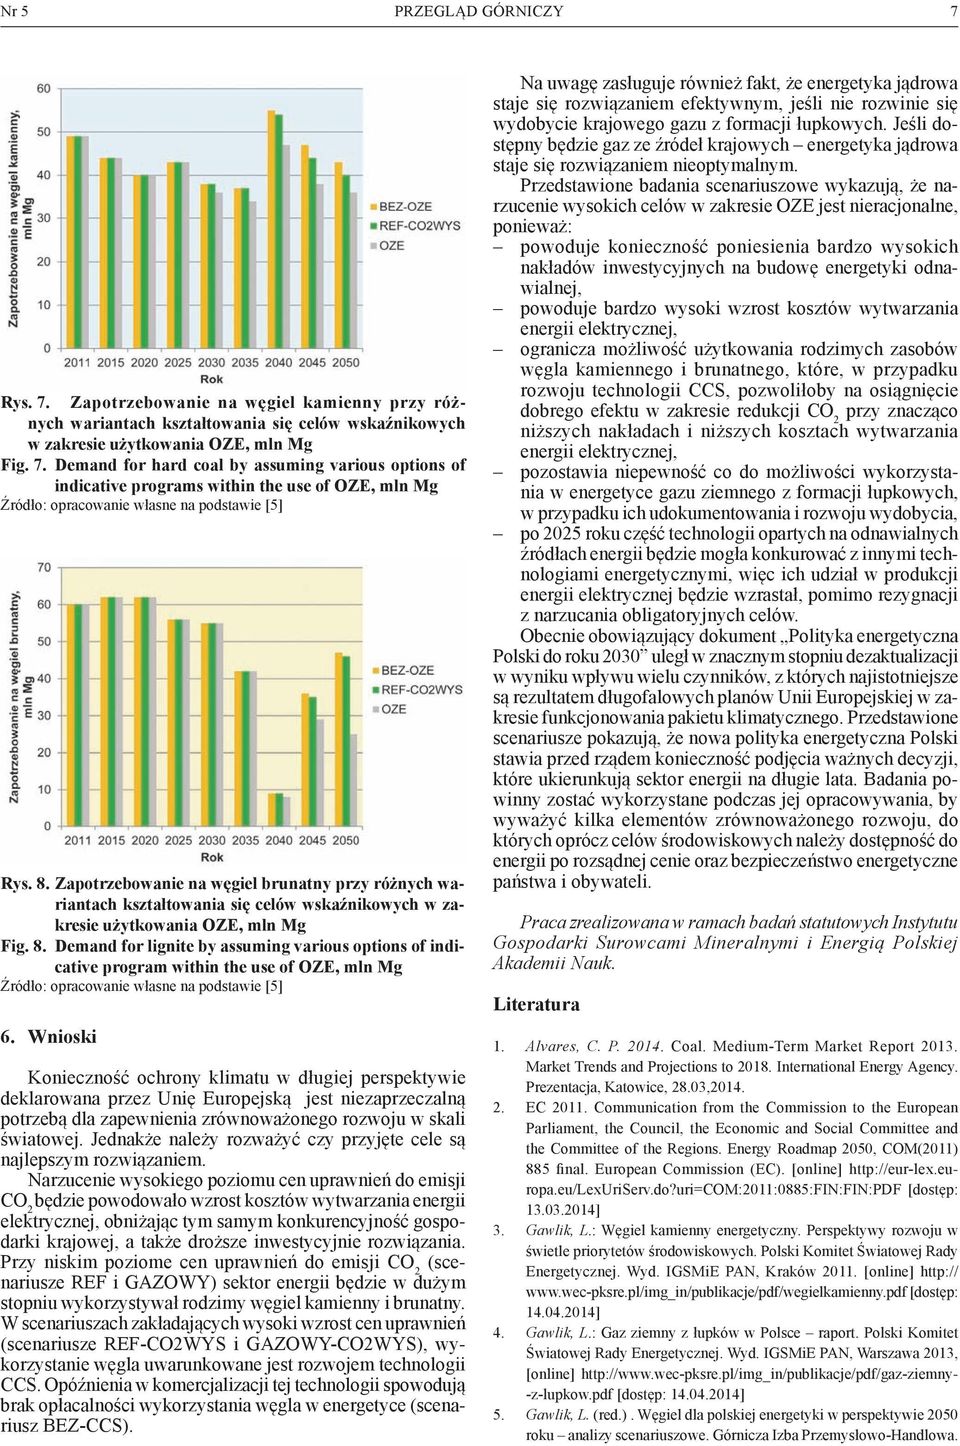 Demand for lignite by assuming various options of indicative program within the use of OZE, mln Mg Źródło: opracowanie własne na podstawie [5] 6.